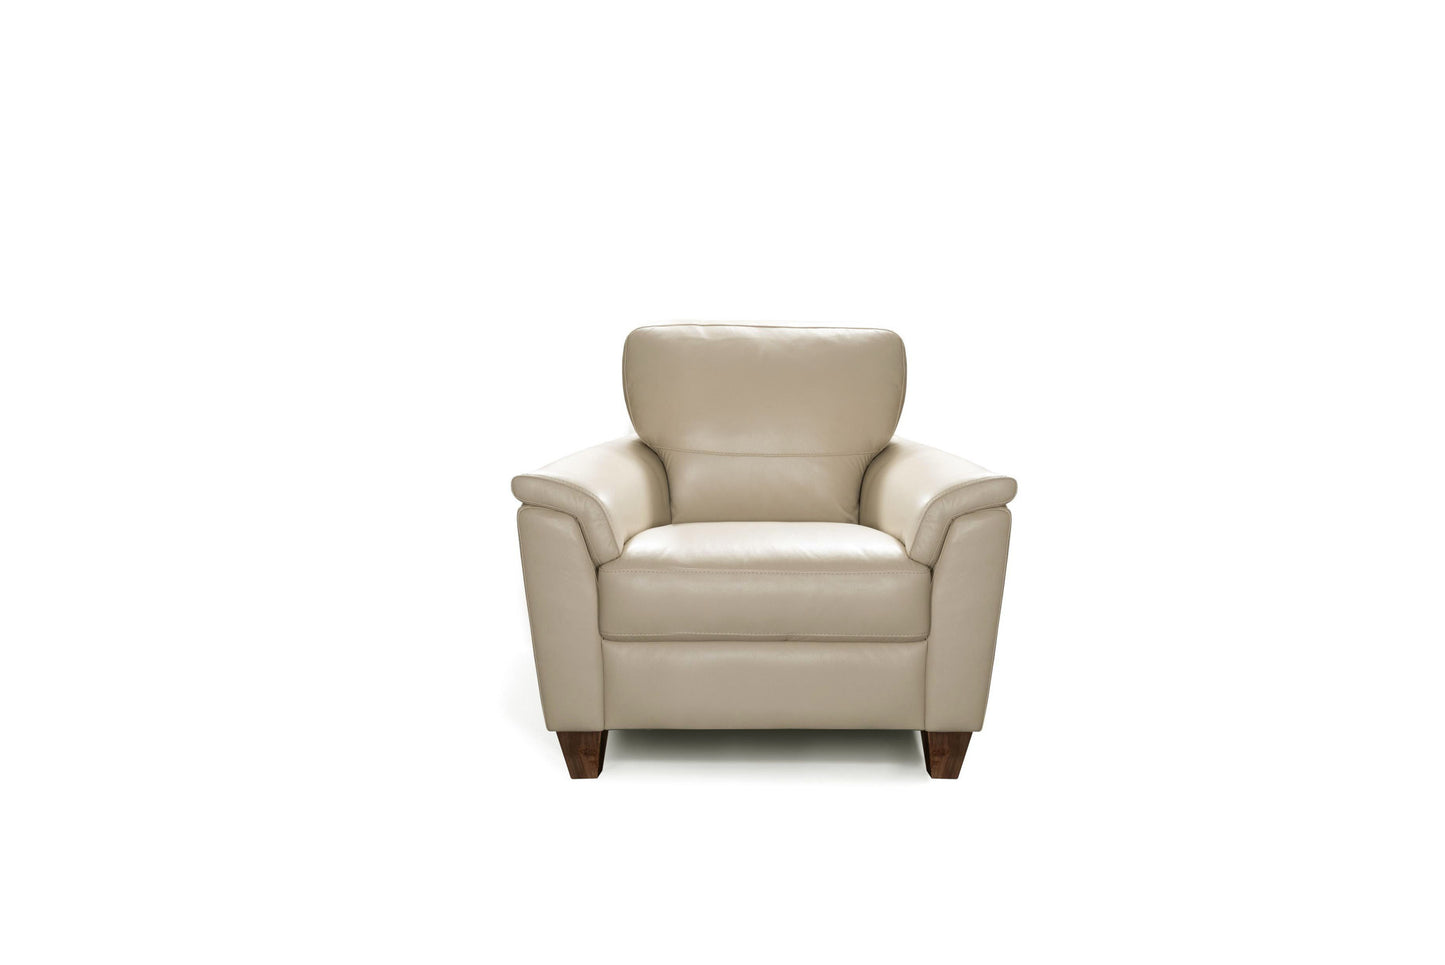 39" Beige and Brown Genuine Leather Arm Chair